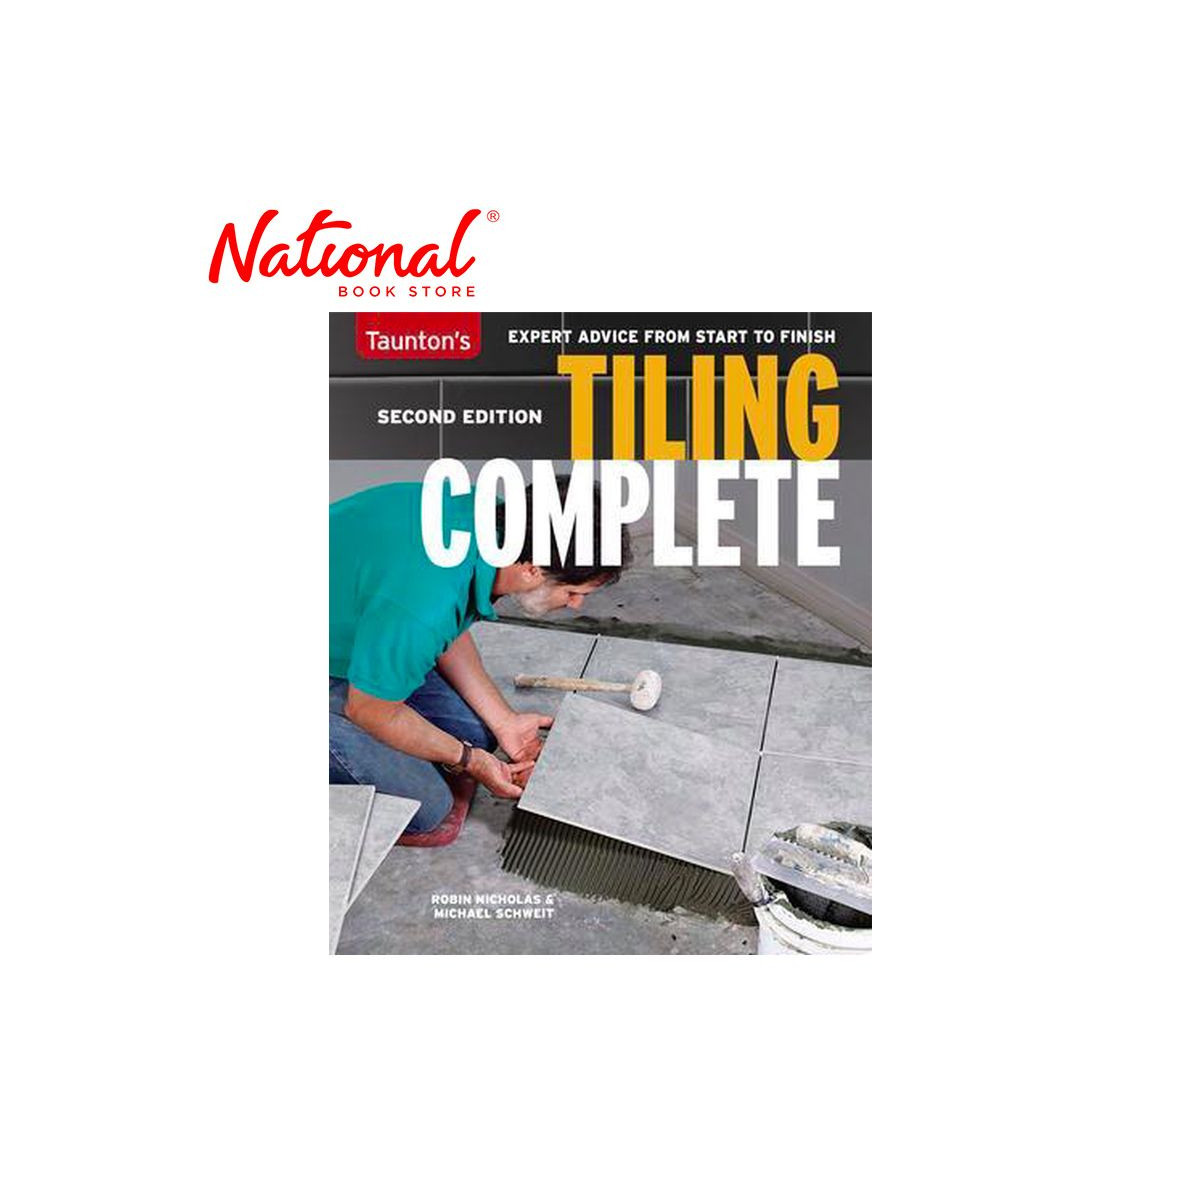 Tiling Complete: 2nd Edition Trade Paperback by Michael Schweit and Robin Nicholas - DIY Home